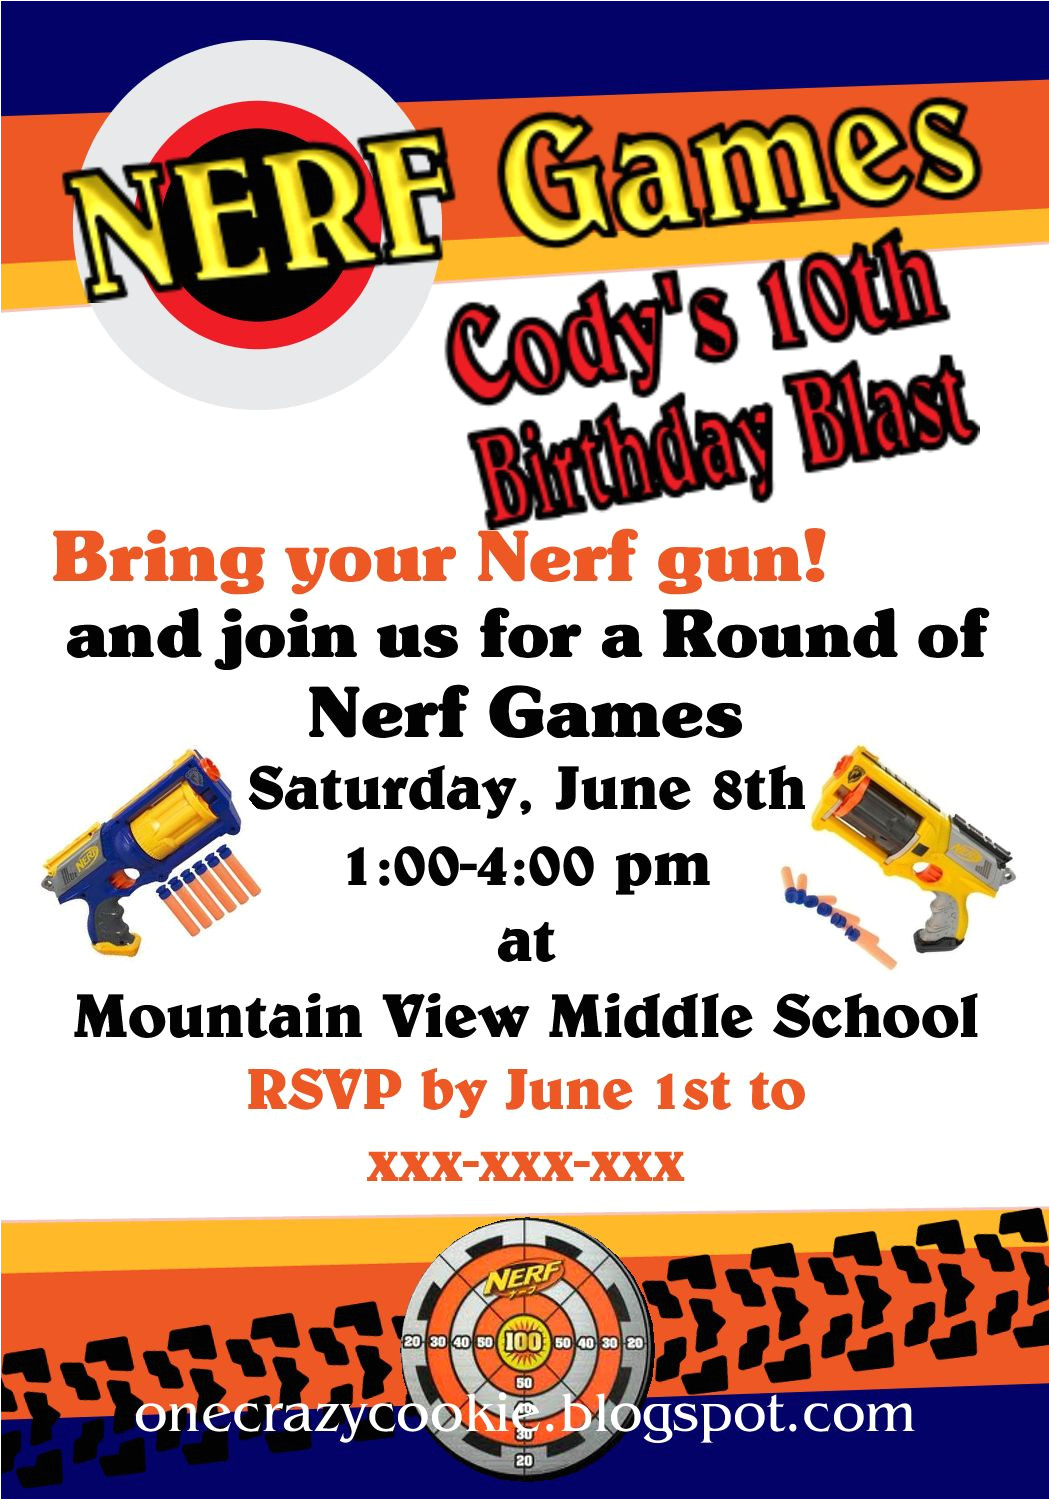 Nerf Party Invitation Template One Crazy Cookie Using My Creative Side On A Nerf Party